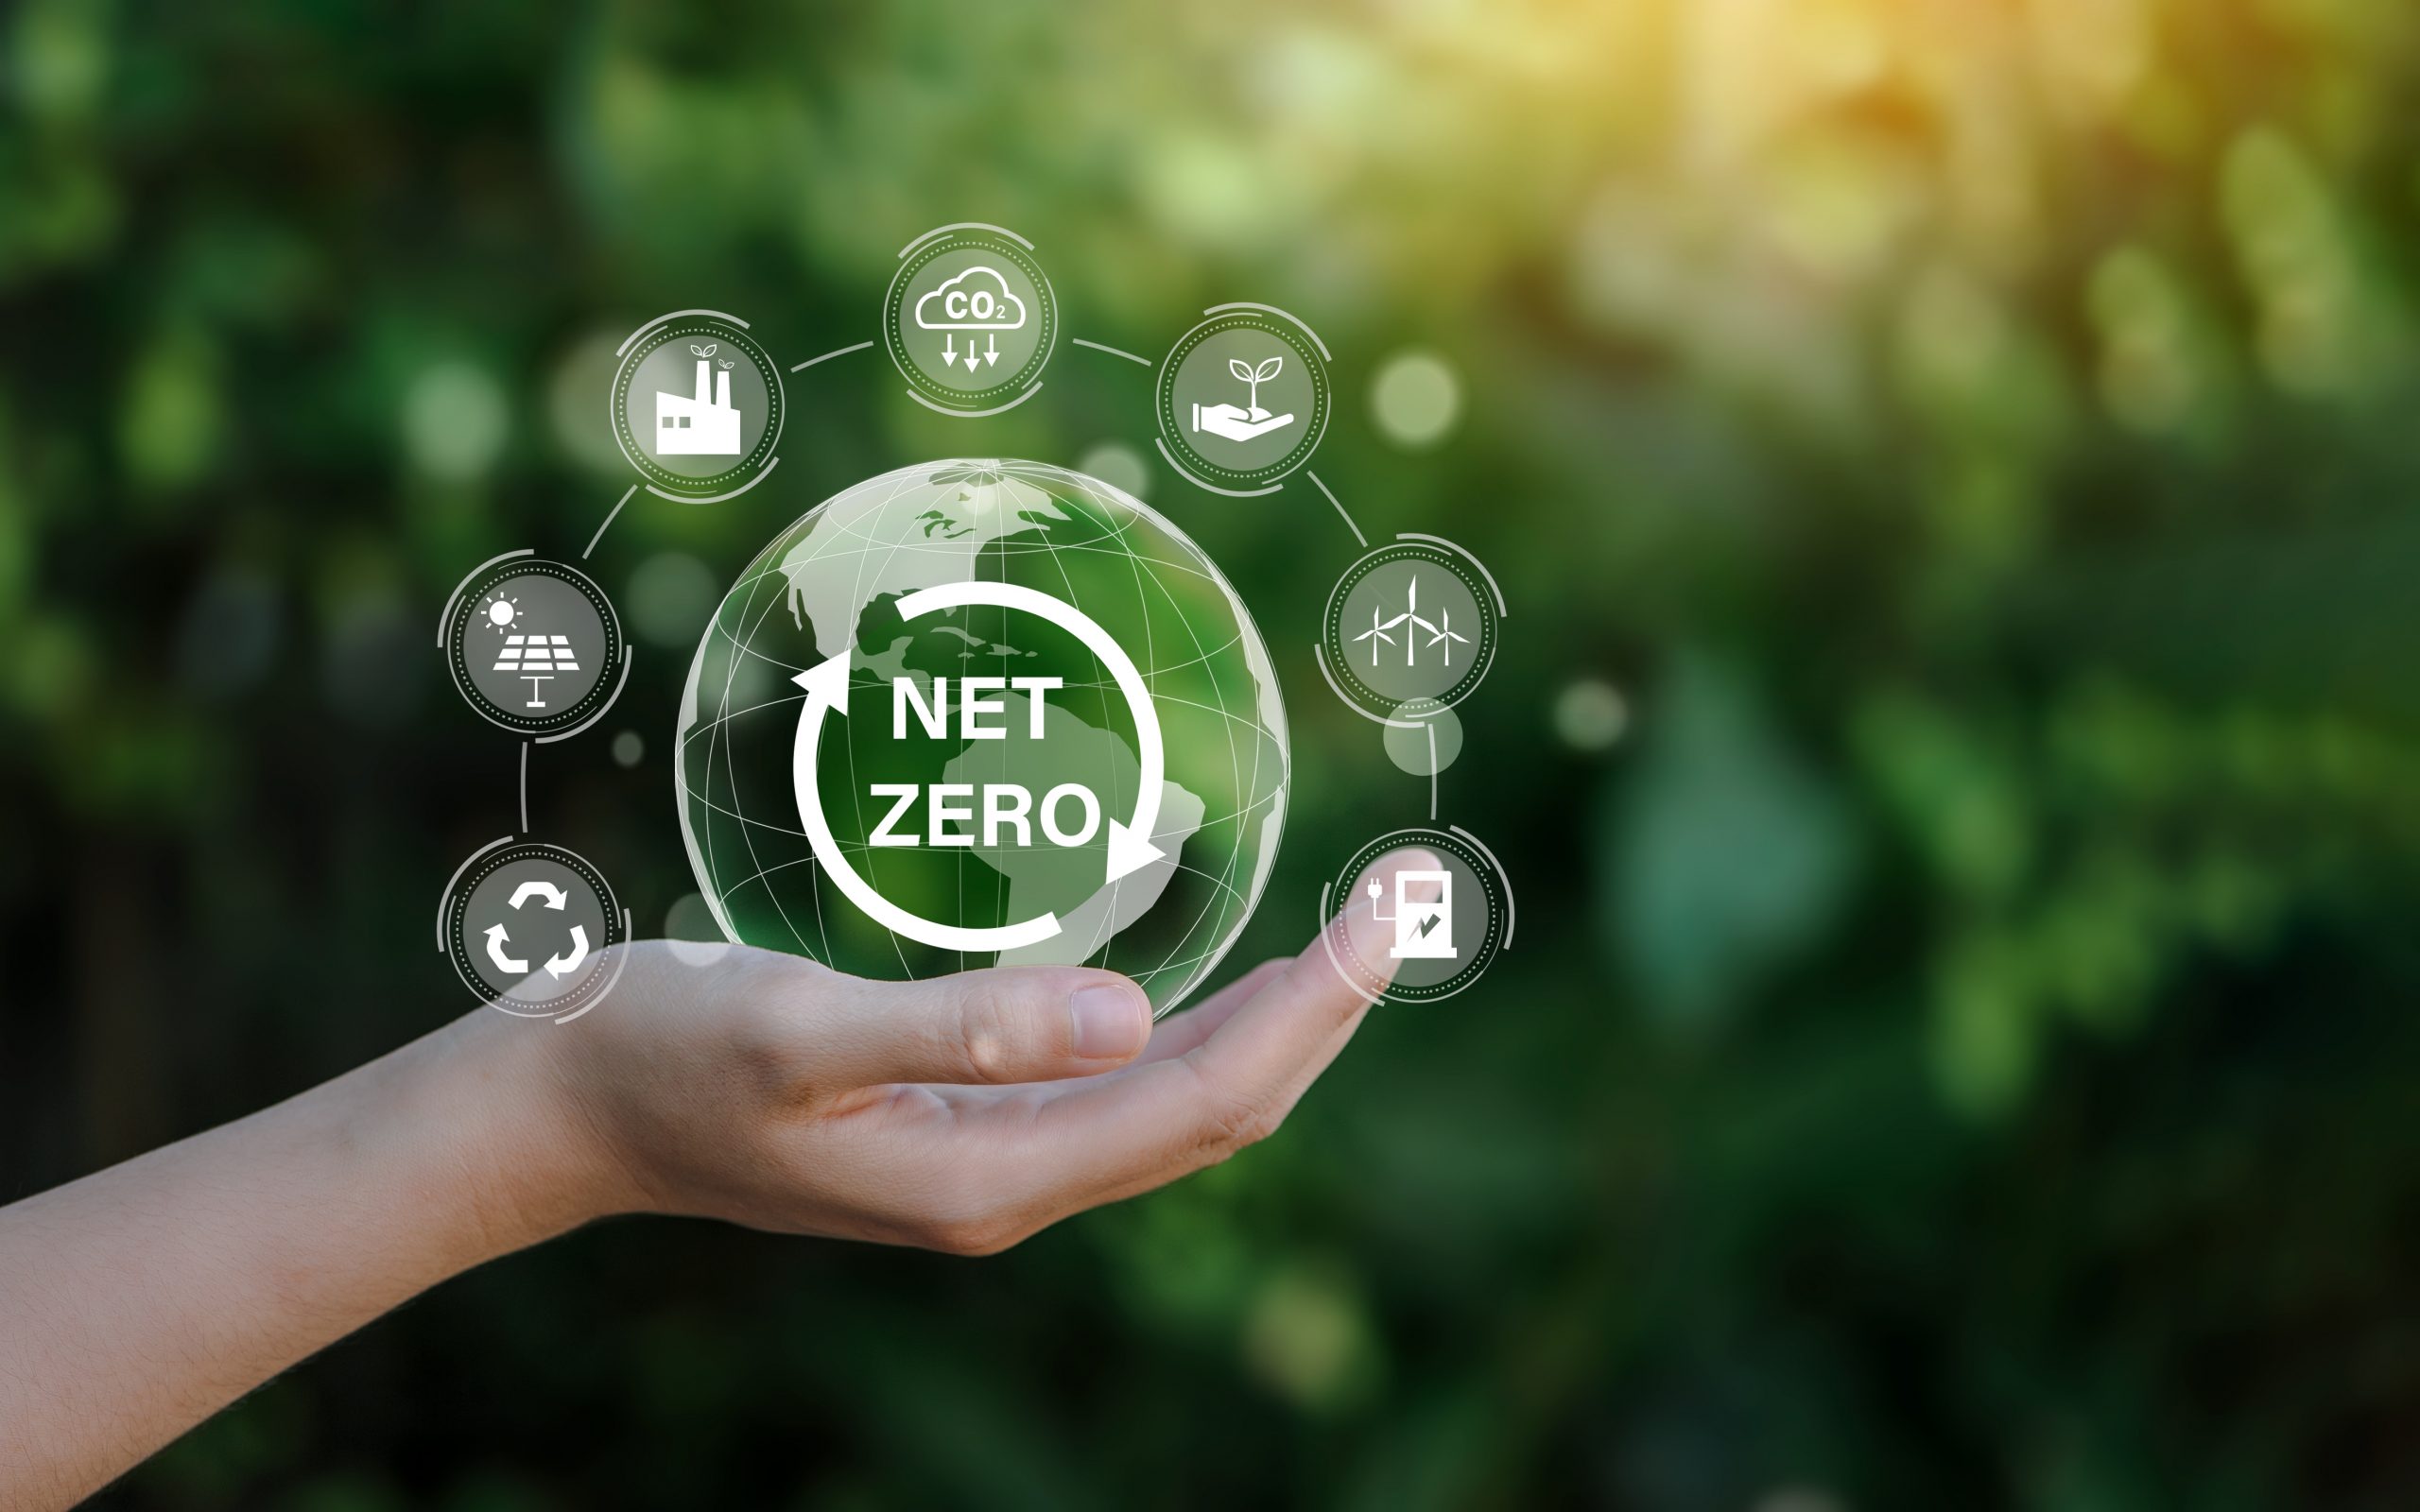 Net,Zero,Icon,And,Carbon,Neutral,Concept,In,The,Hand